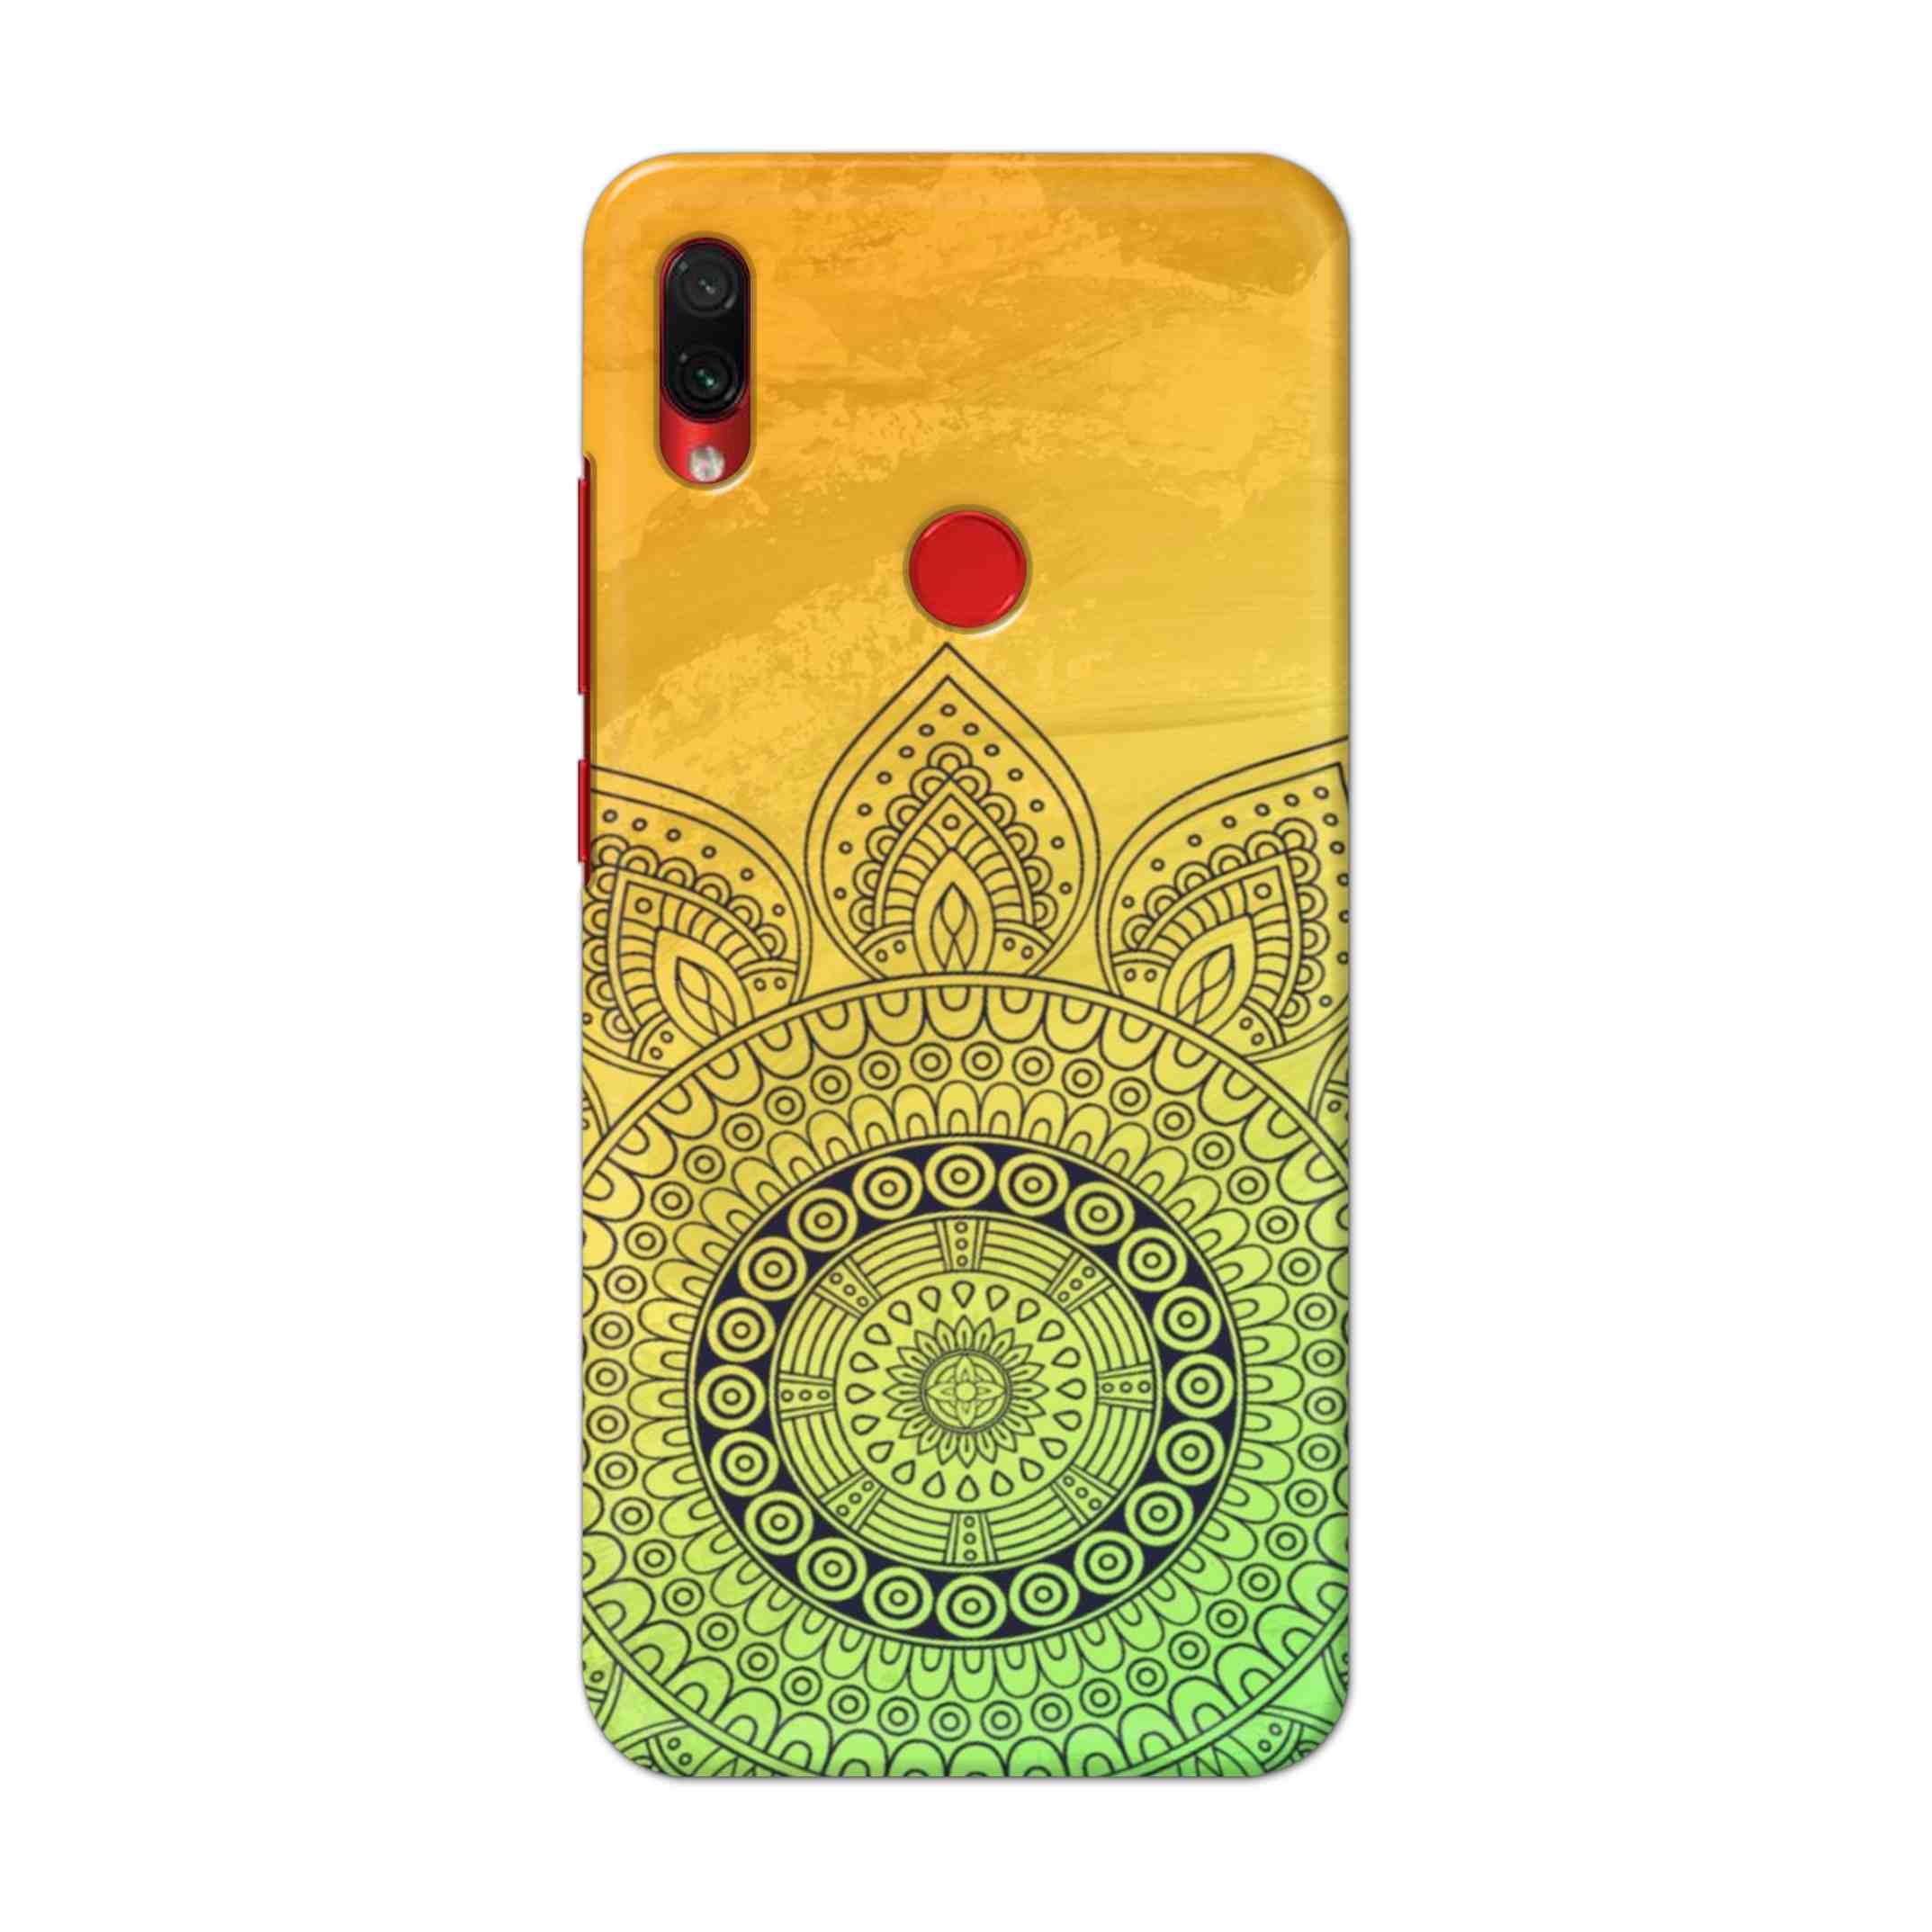 Buy Yellow Rangoli Hard Back Mobile Phone Case Cover For Xiaomi Redmi Note 7S Online